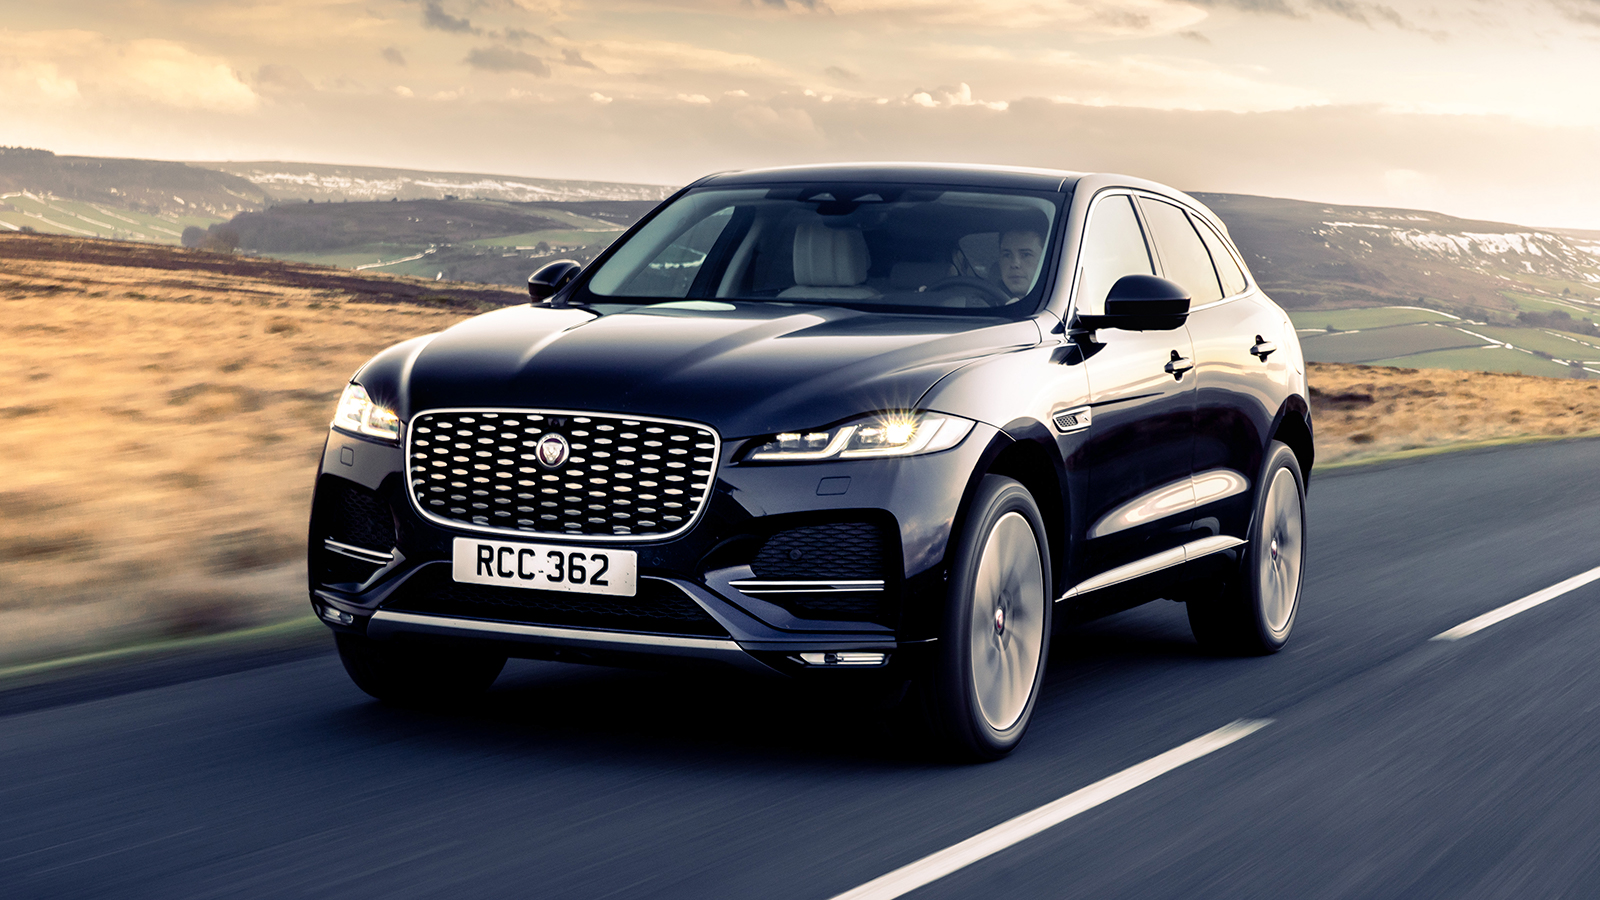 Jaguar F-Pace Launched In India At Rs. 69.99 Lakh